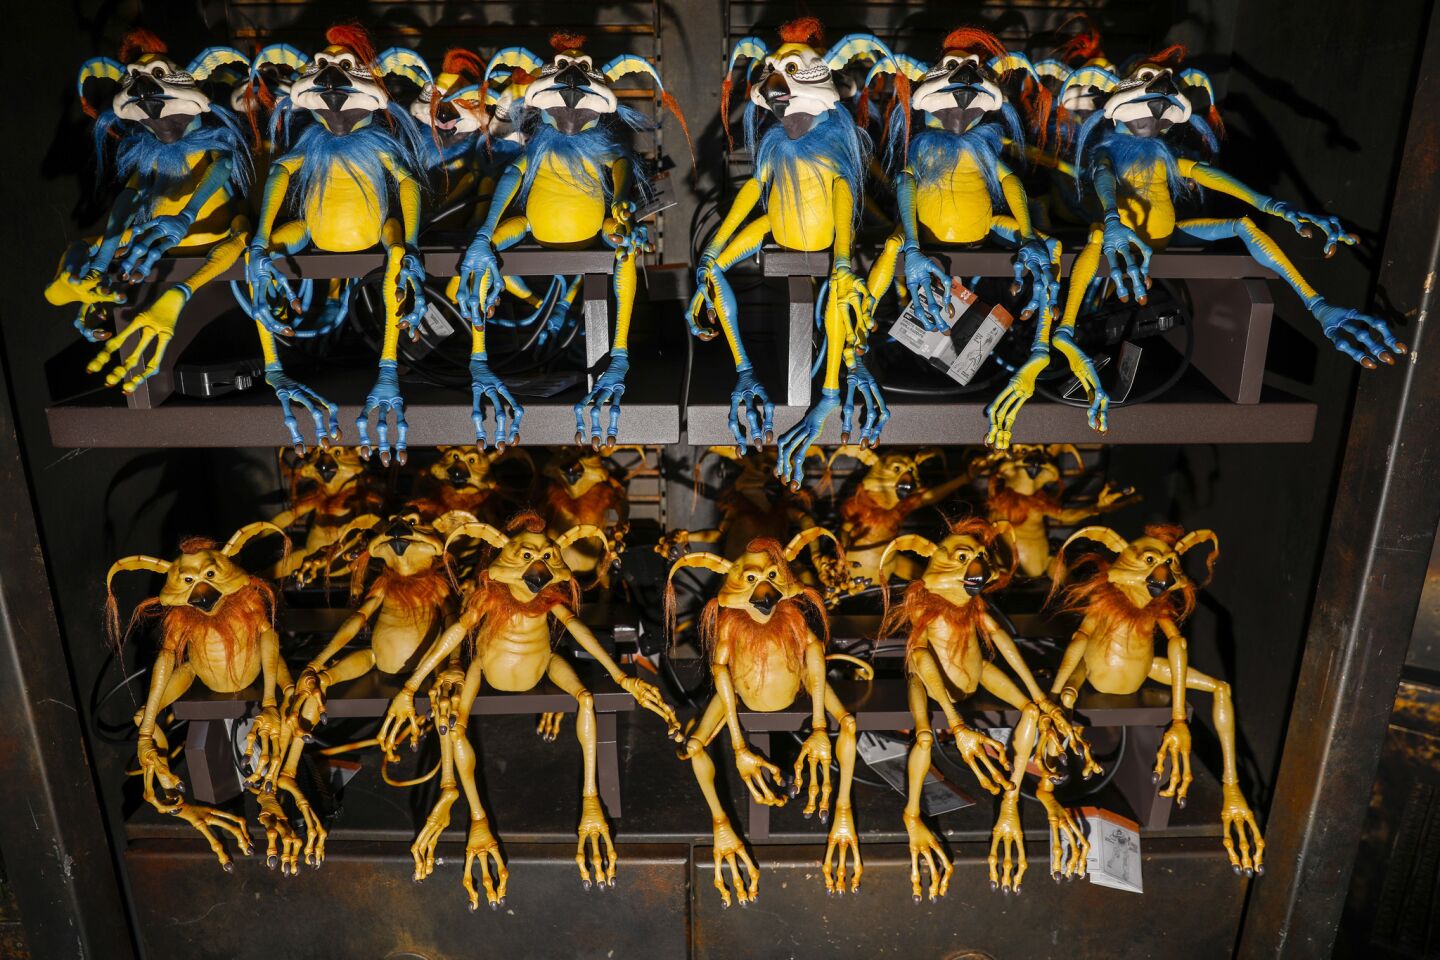 Kowakian Monkey-Lizard toys, for $69.99, at the Creature stall inside the marketplace of the new Star Wars: Galaxy's Edge.